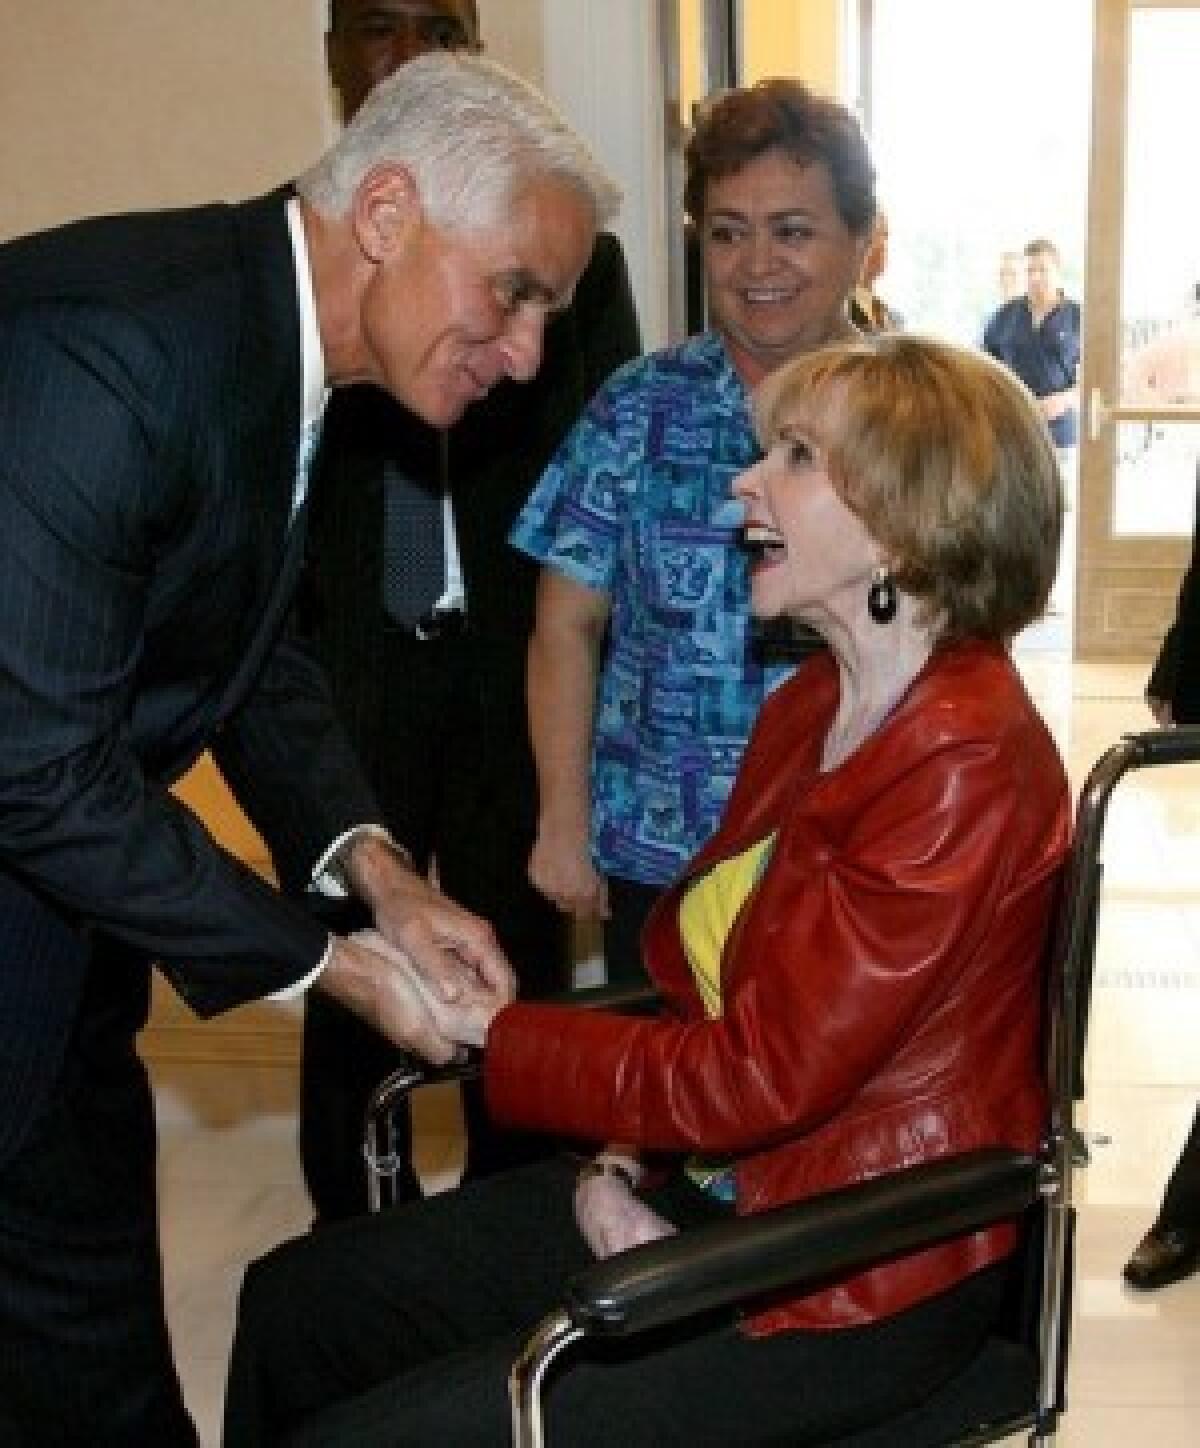 Paula Hawkins greets Florida Gov. Charlie Crist at an event in Orlando in October. As a U.S. senator in the 1980s, Hawkins helped pass the Missing Children Act and revealed at a Congressional hearing that she had been molested as a child.